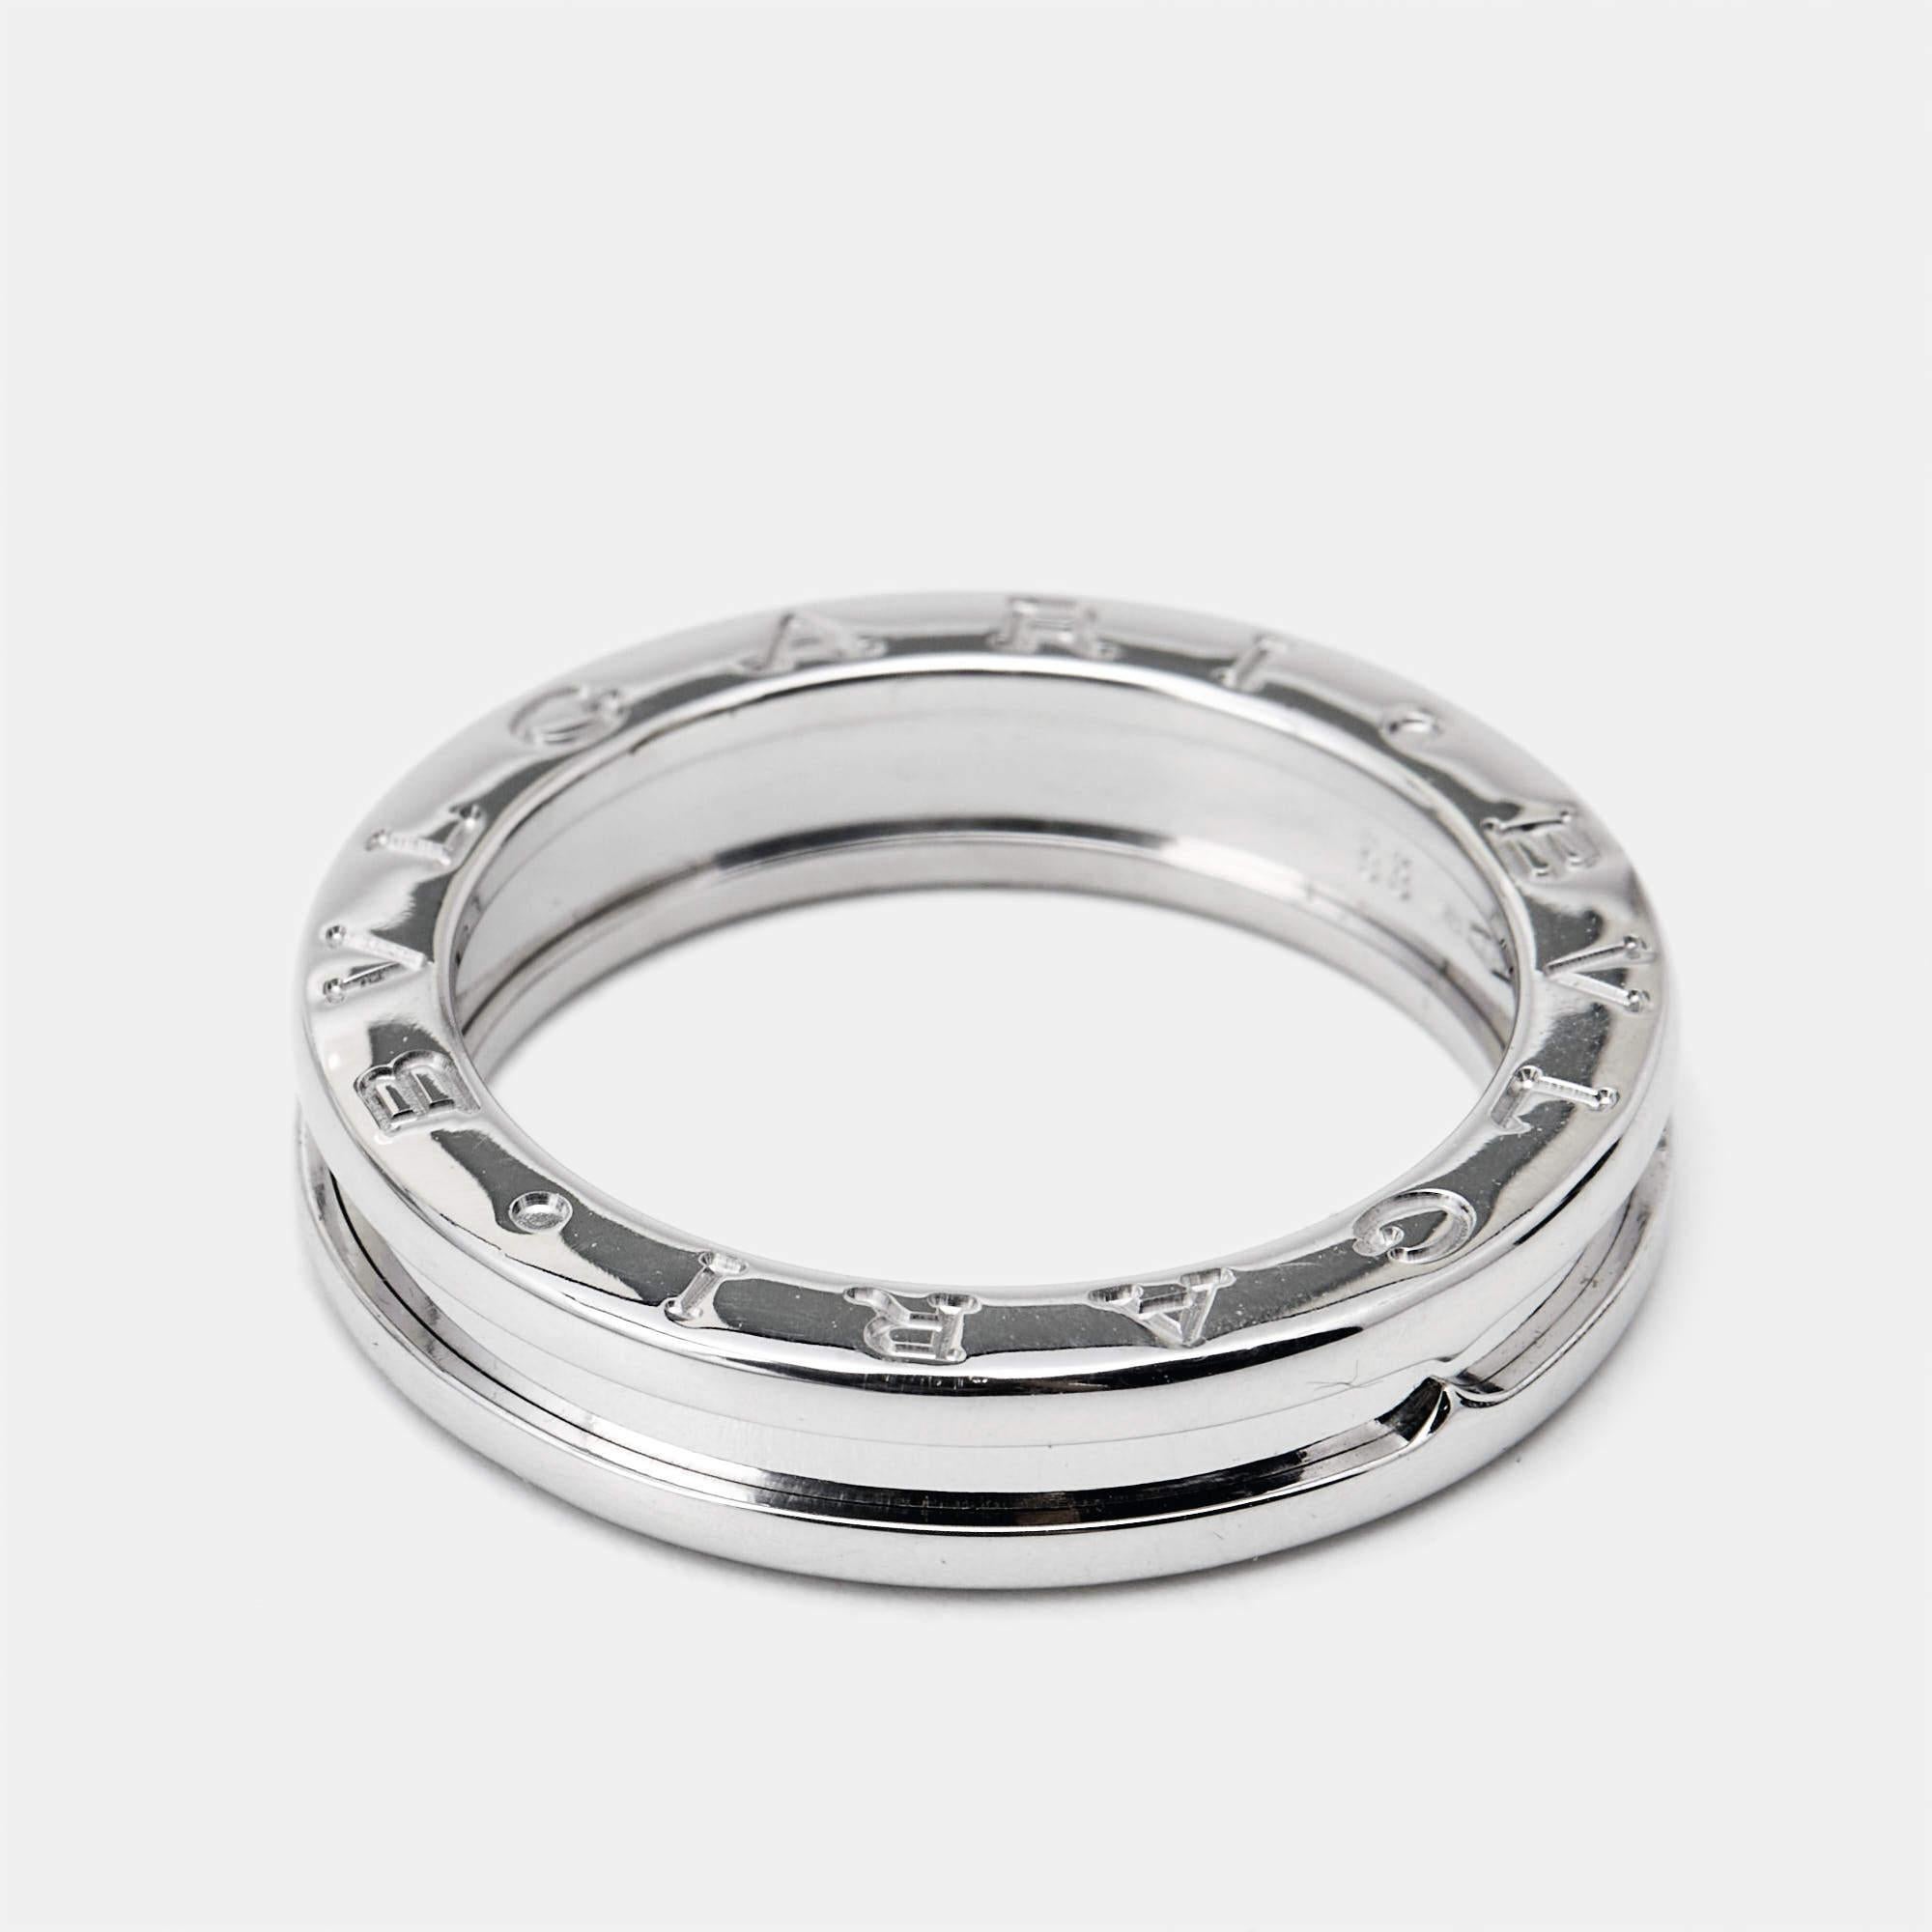 To adorn your fingers in the most elegant way, Bvlgari B.Zero1 brings to you this stylish ring. It has been carved using top-quality materials and will elevate your look instantly.

Includes
Authenticity Card, Original Box, Original Pouch, Original